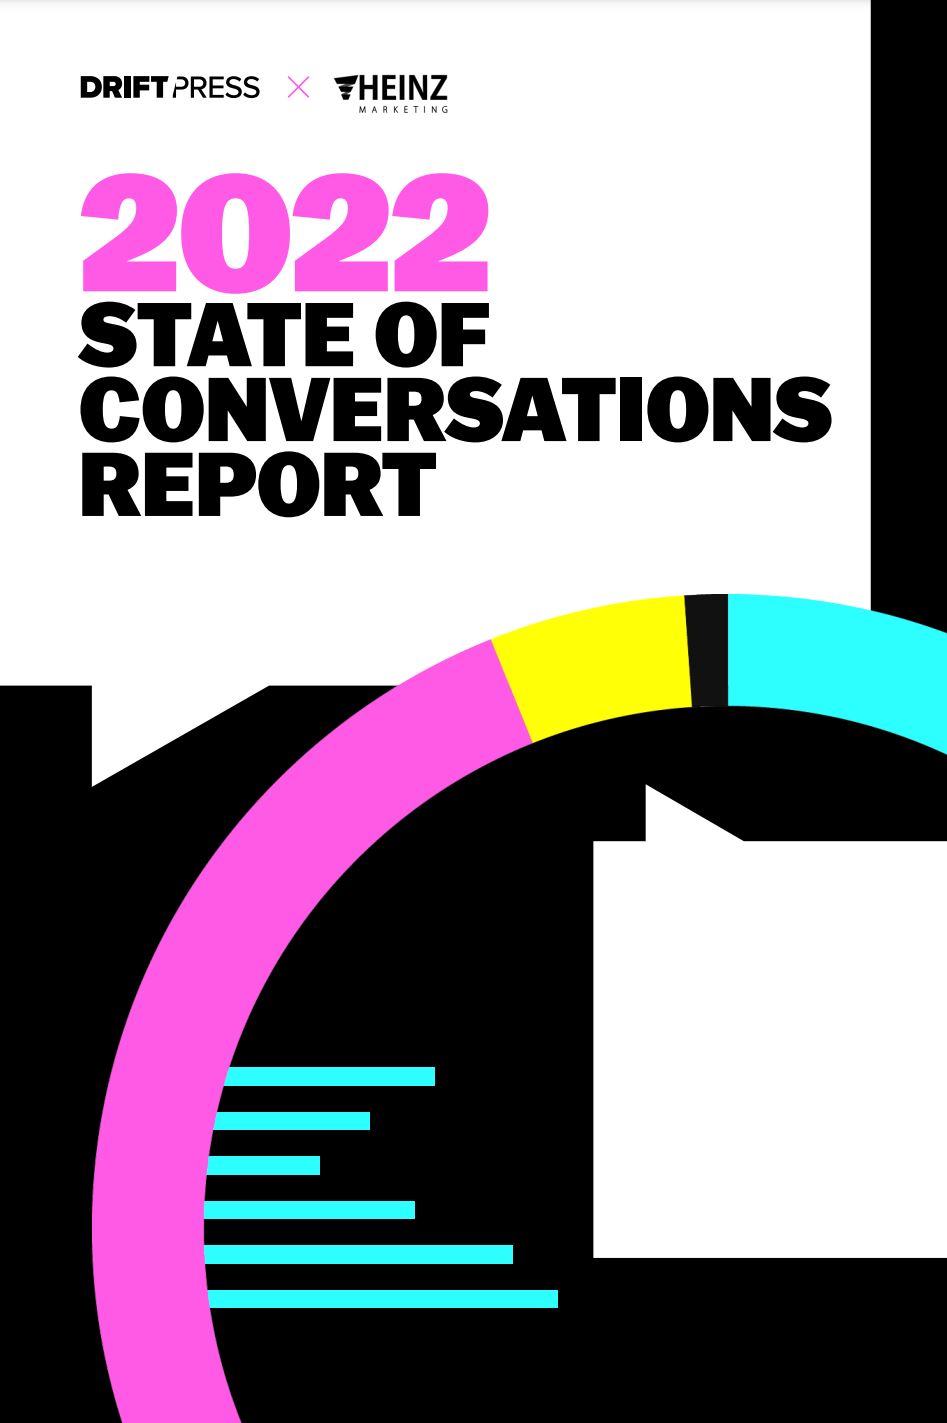 The 2022 State of Conversations Report